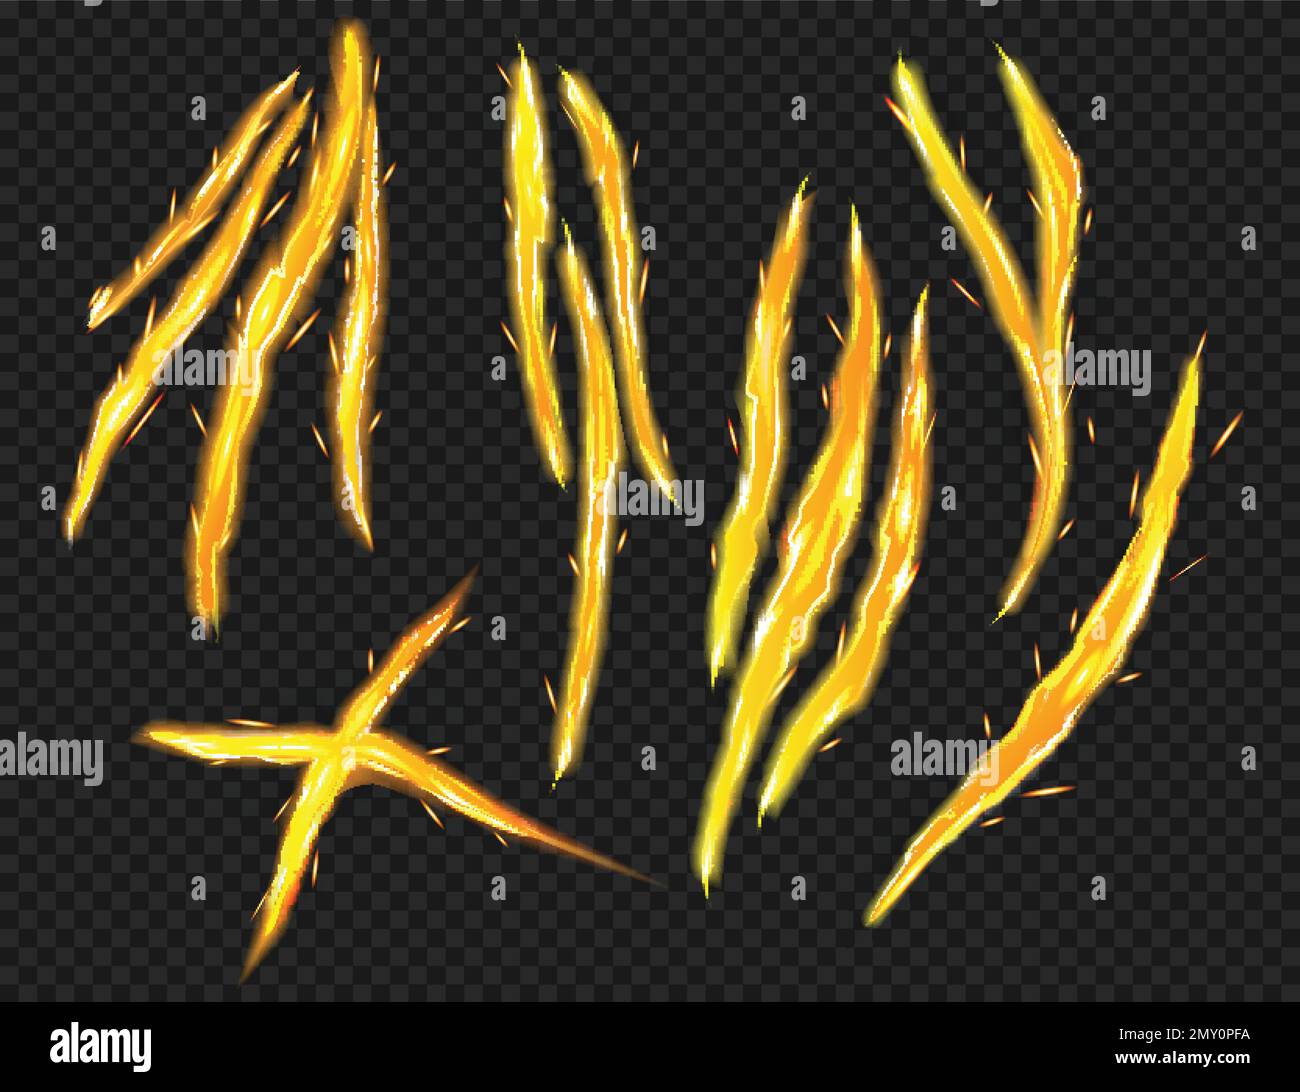 Realistic claws scratches monster set with sparkling scrapes filled with fire flames isolated on dark background vector illustration Stock Vector